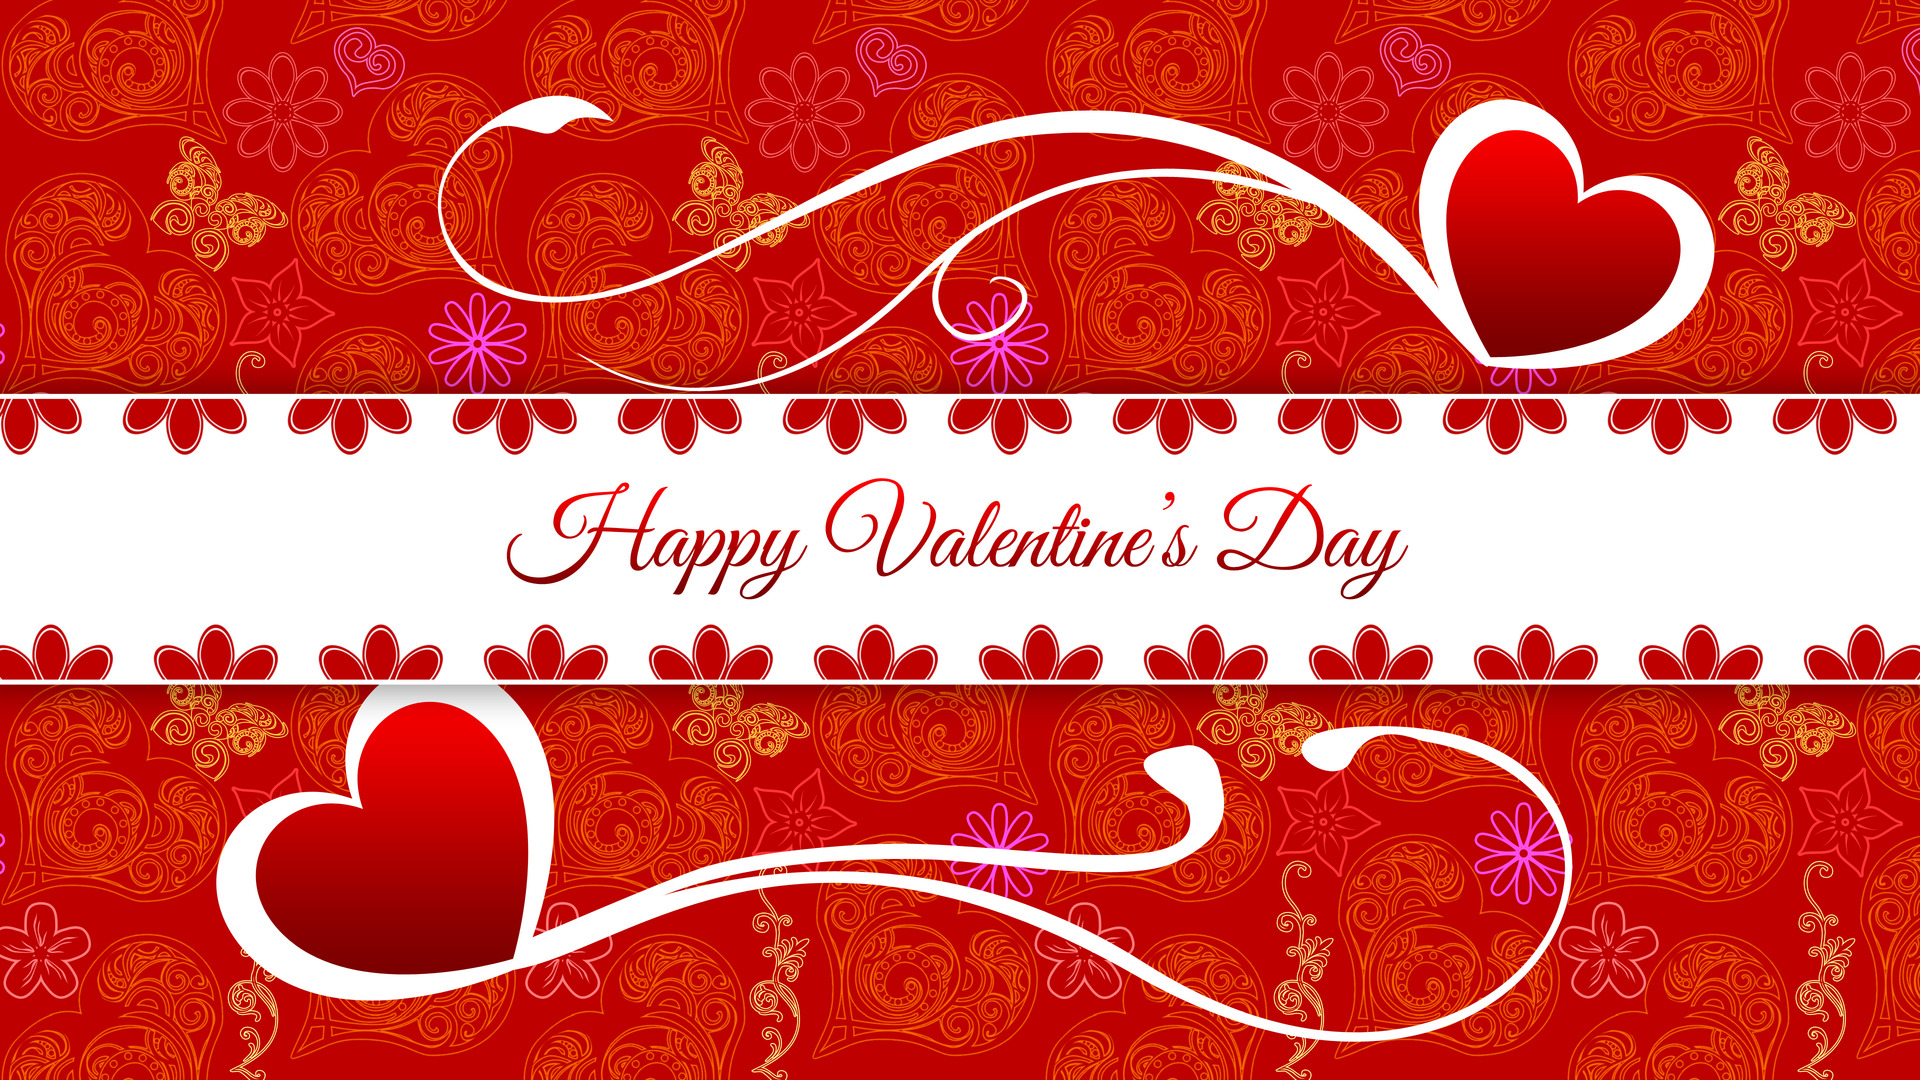 Free Download Happy Valentines Day Card Hd Wallpaper Background Image